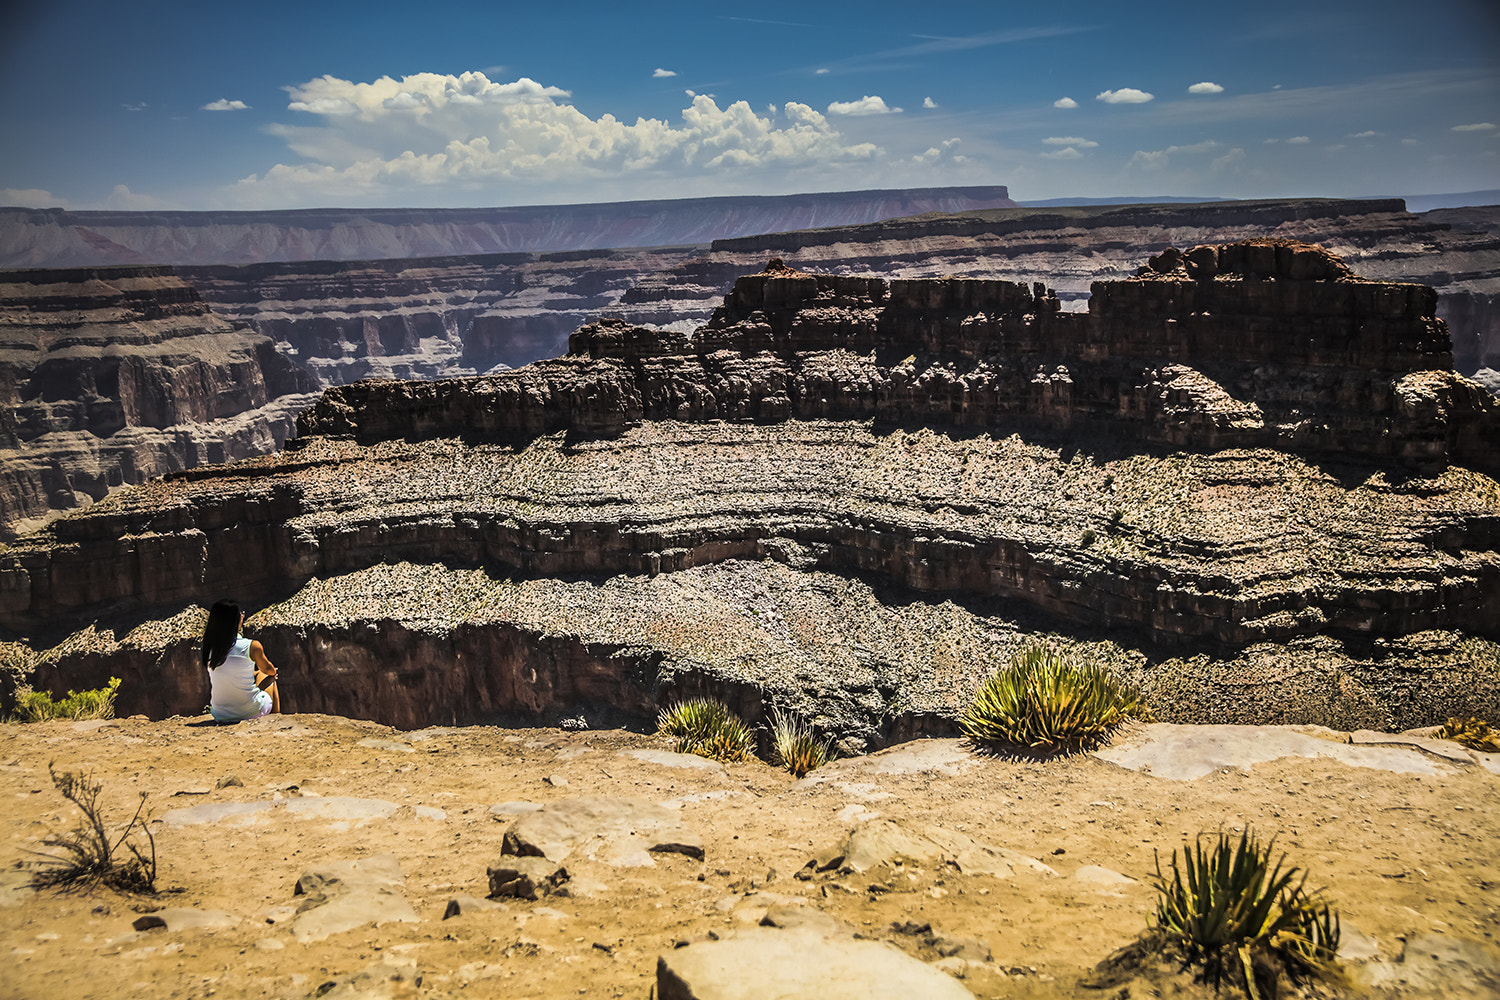 Canon EOS 5DS R + Sigma 24-105mm f/4 DG OS HSM | A sample photo. Grand canyon 1 photography